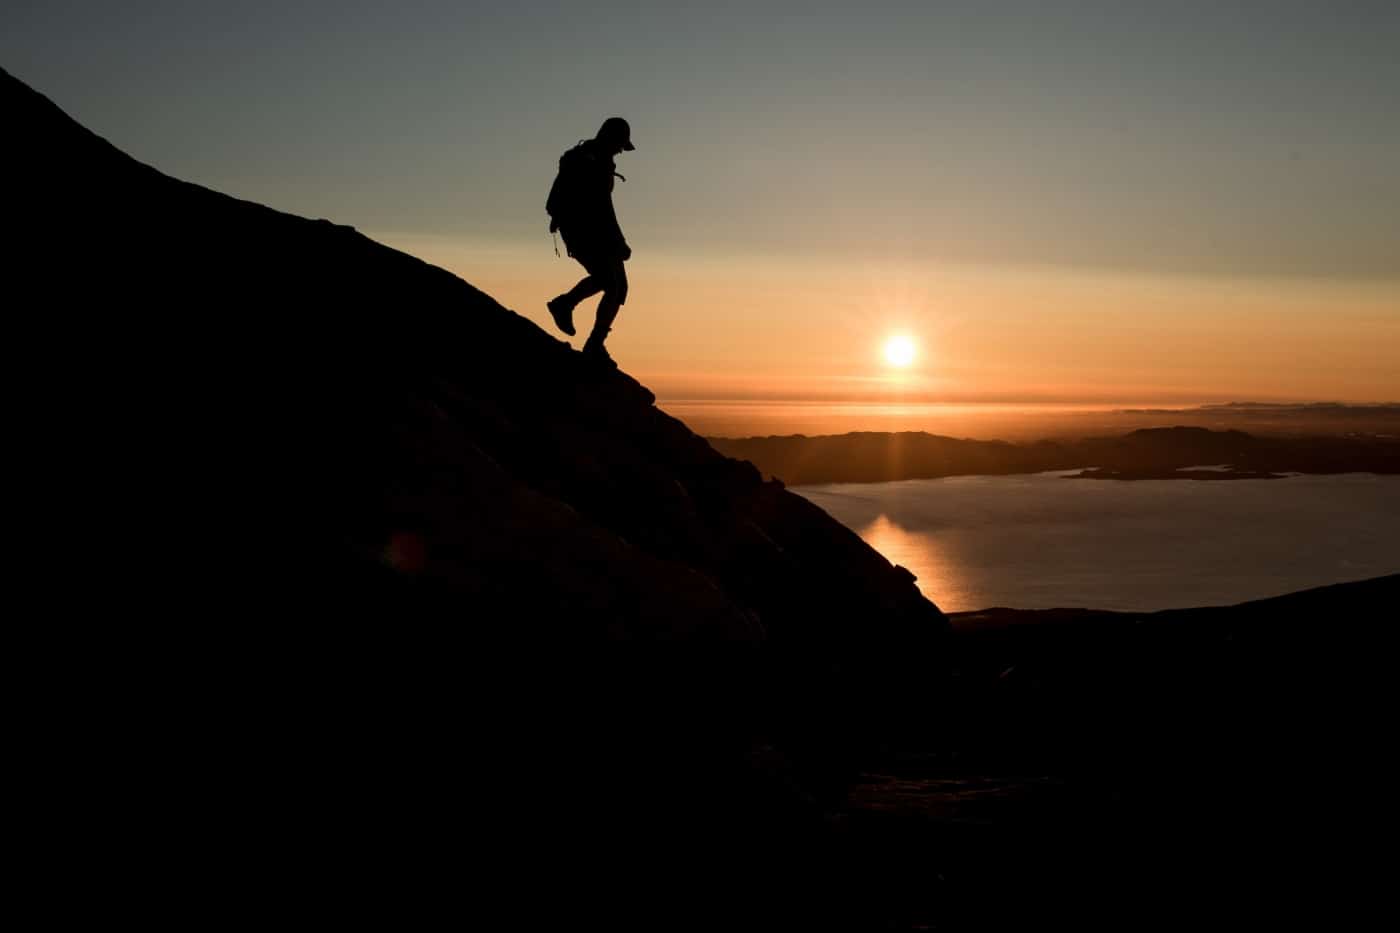 A hiker descending the mountain Ukkusissaq - Store Malene in the midnight sun outside Nuuk in Greenland. By Mads Pihl